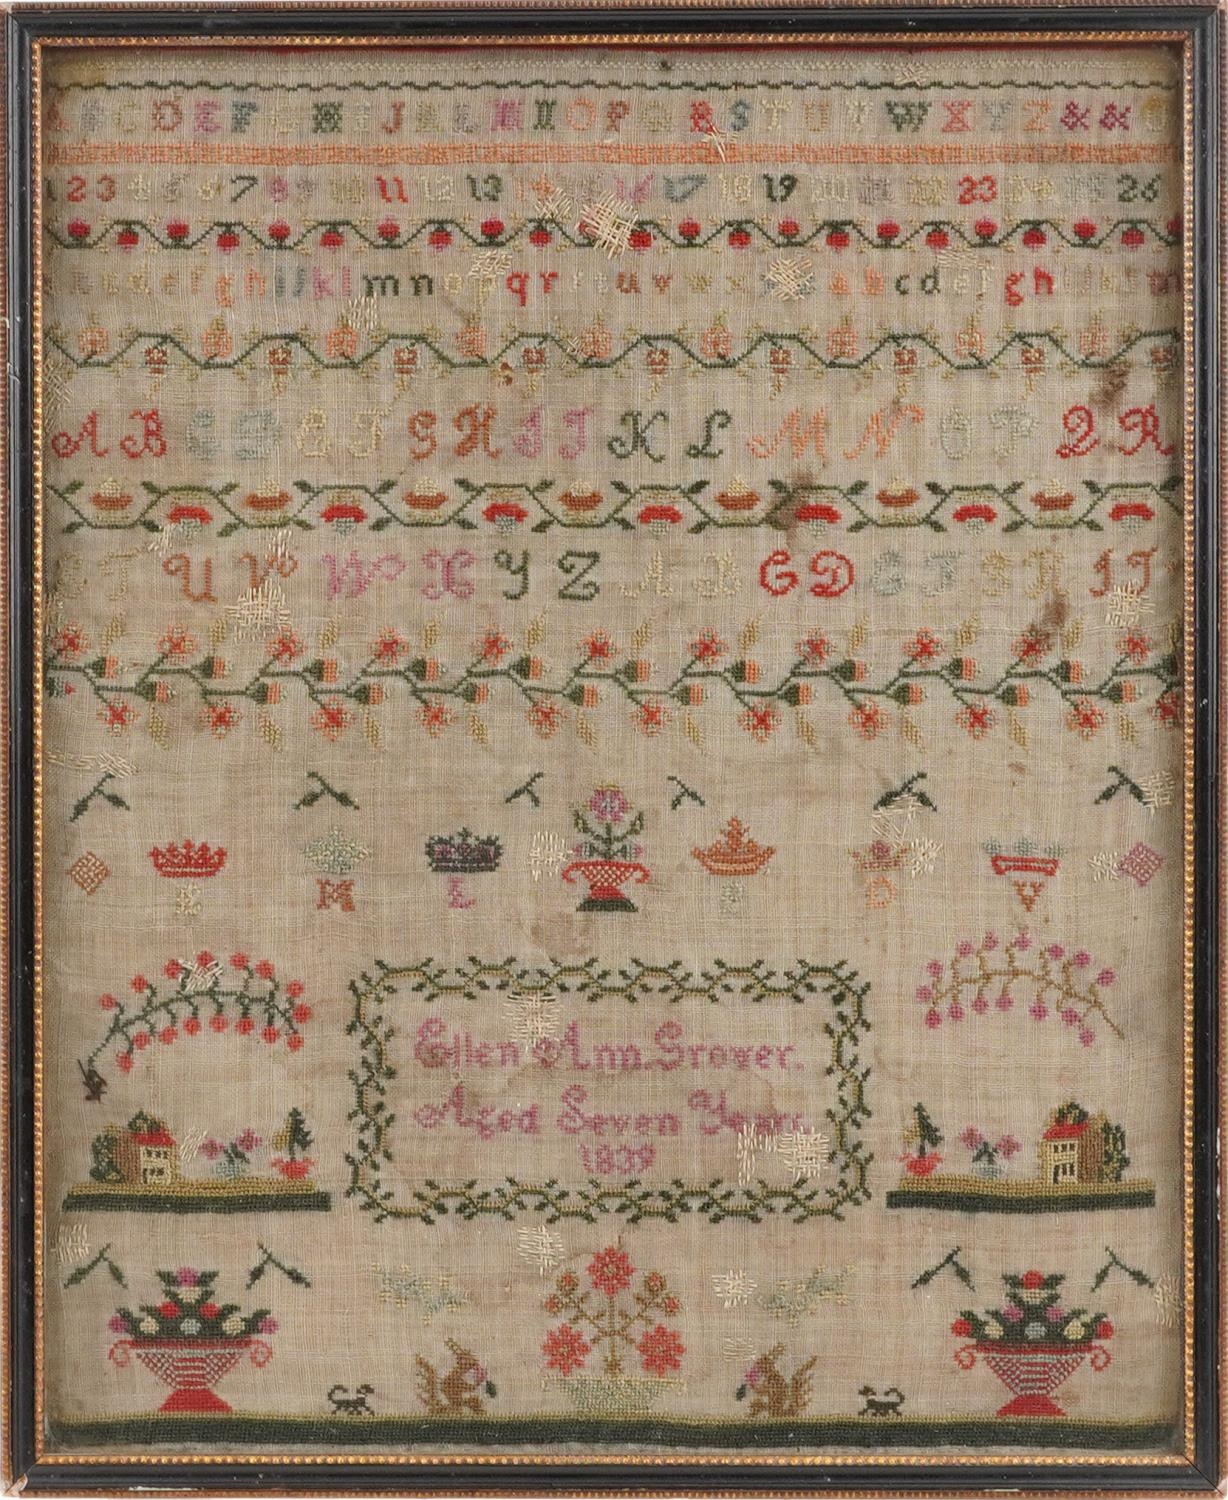 Early Victorian needlework sampler worked by Ellen Ann Grover aged seven years, dated 1839, framed - Image 2 of 4